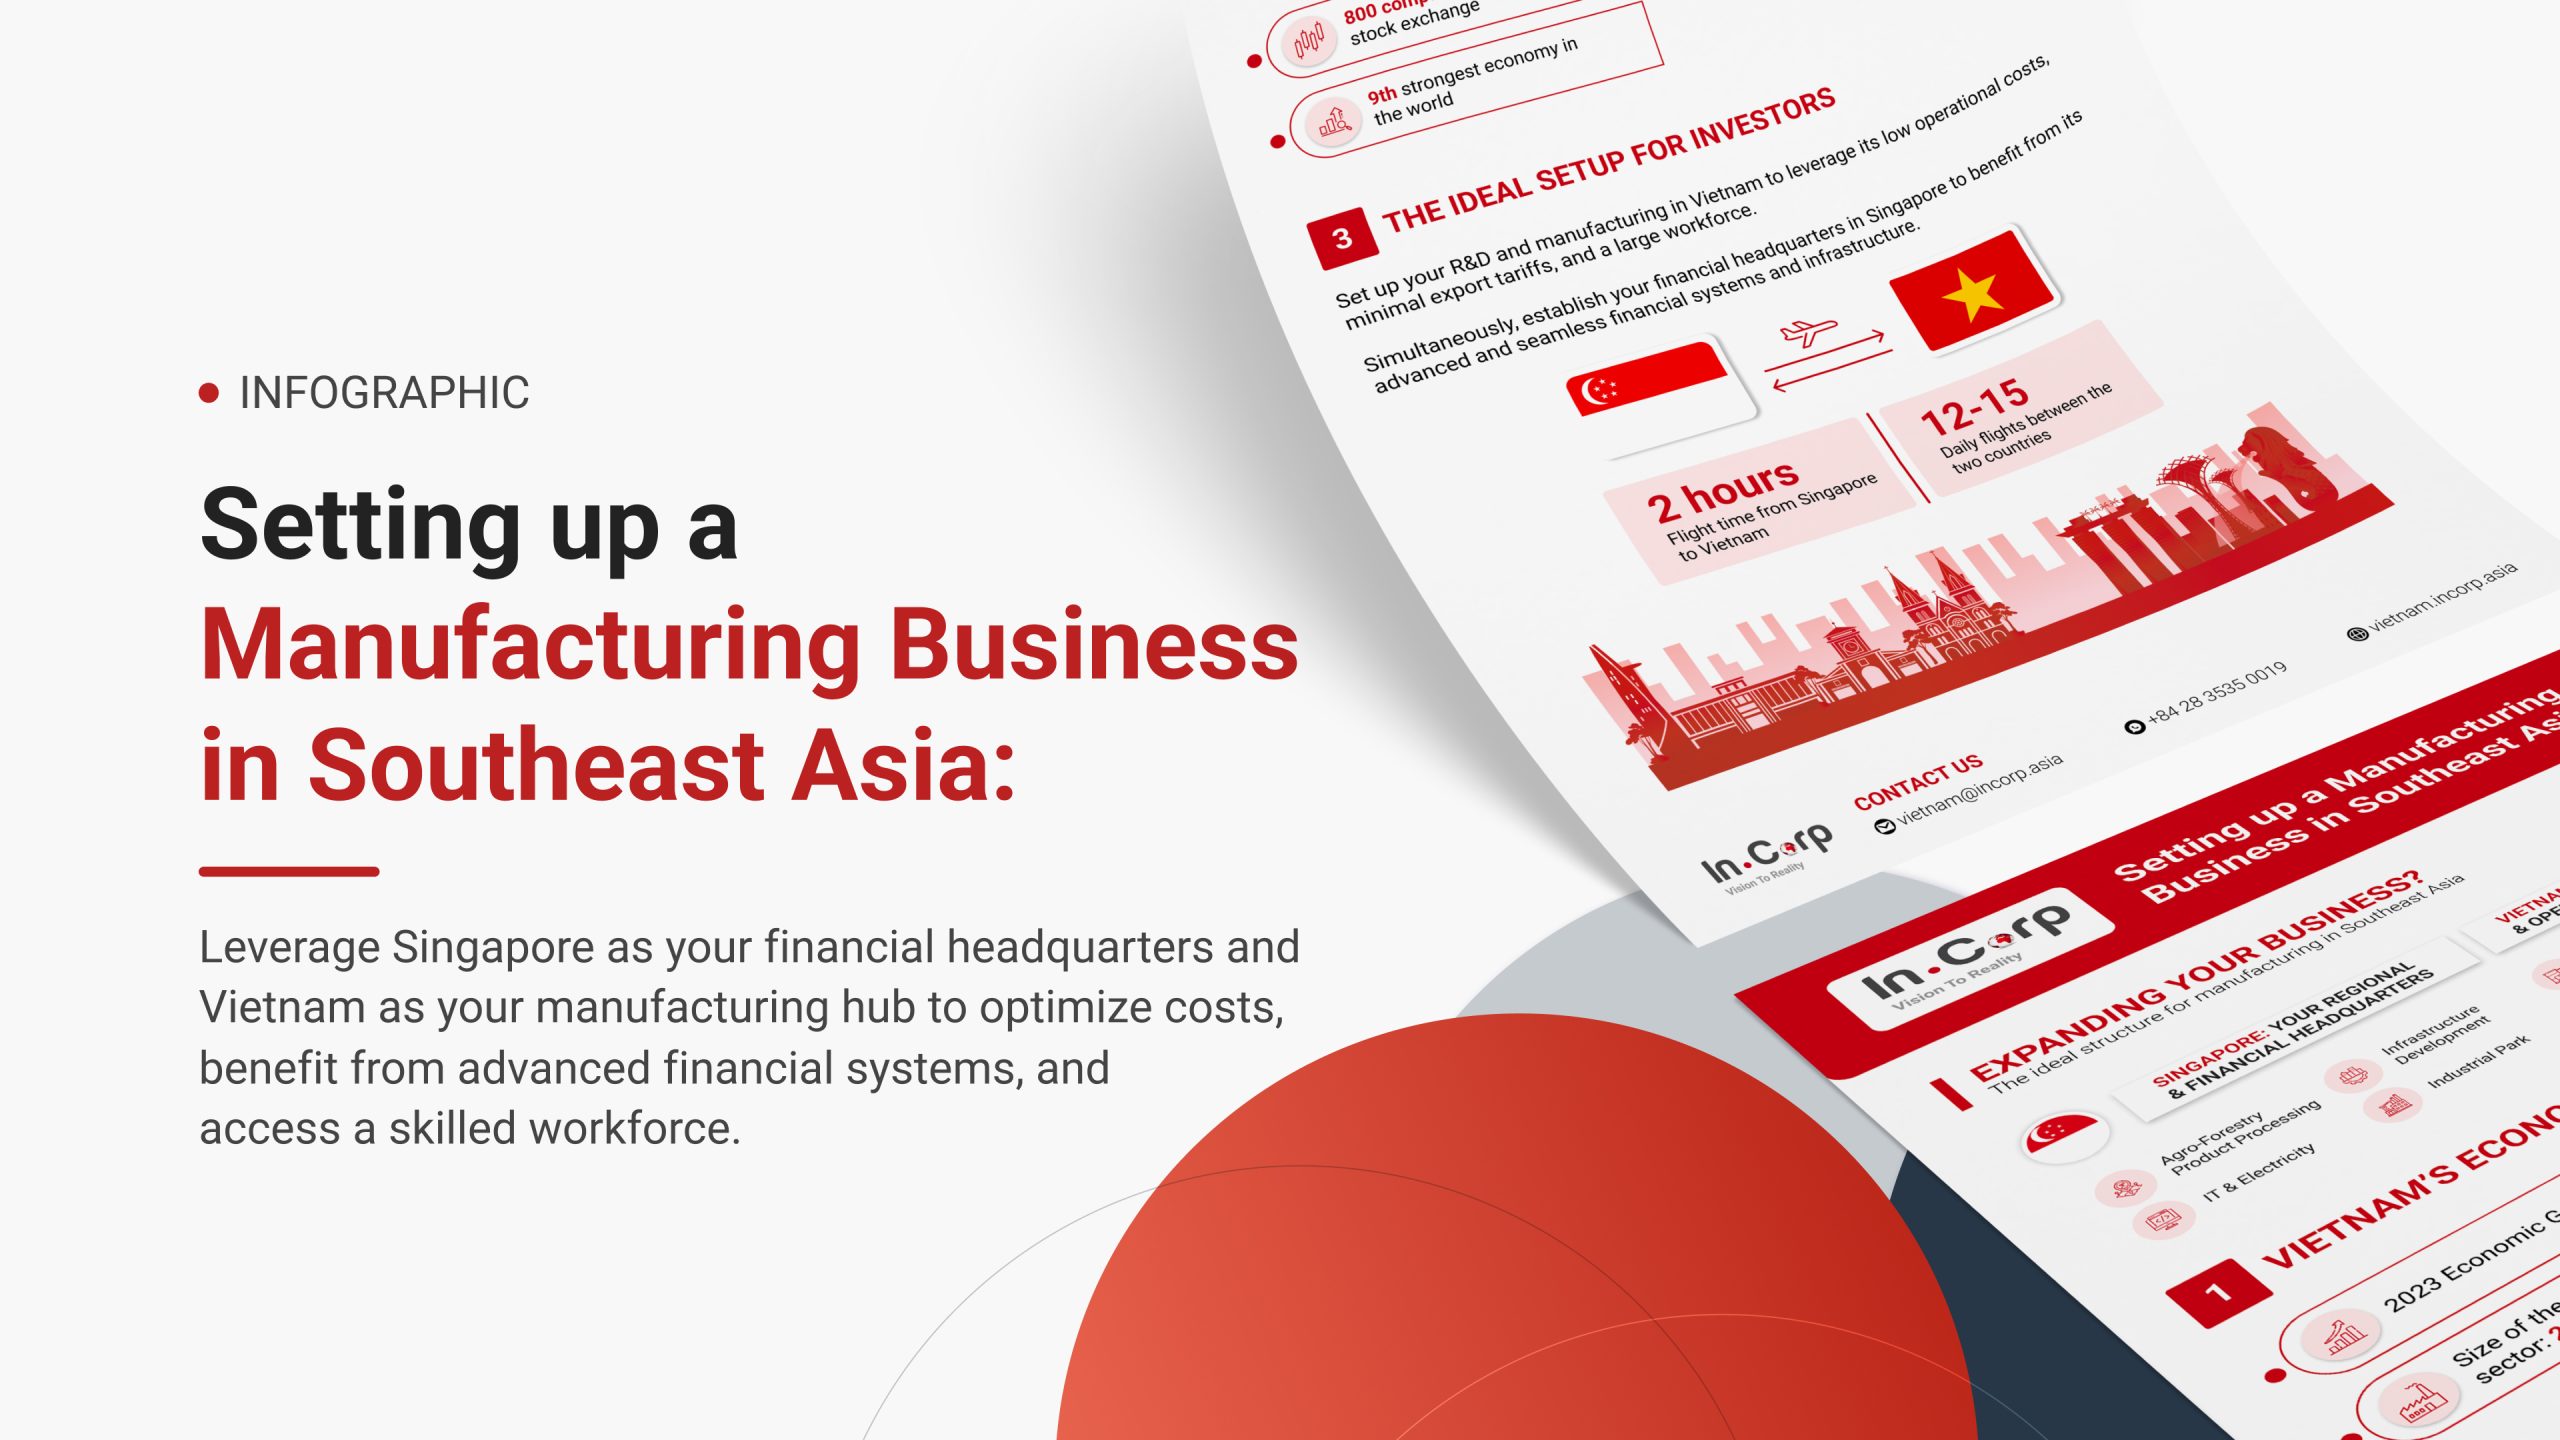 Guide to Setting up Manufacturing Business in Southeast Asia